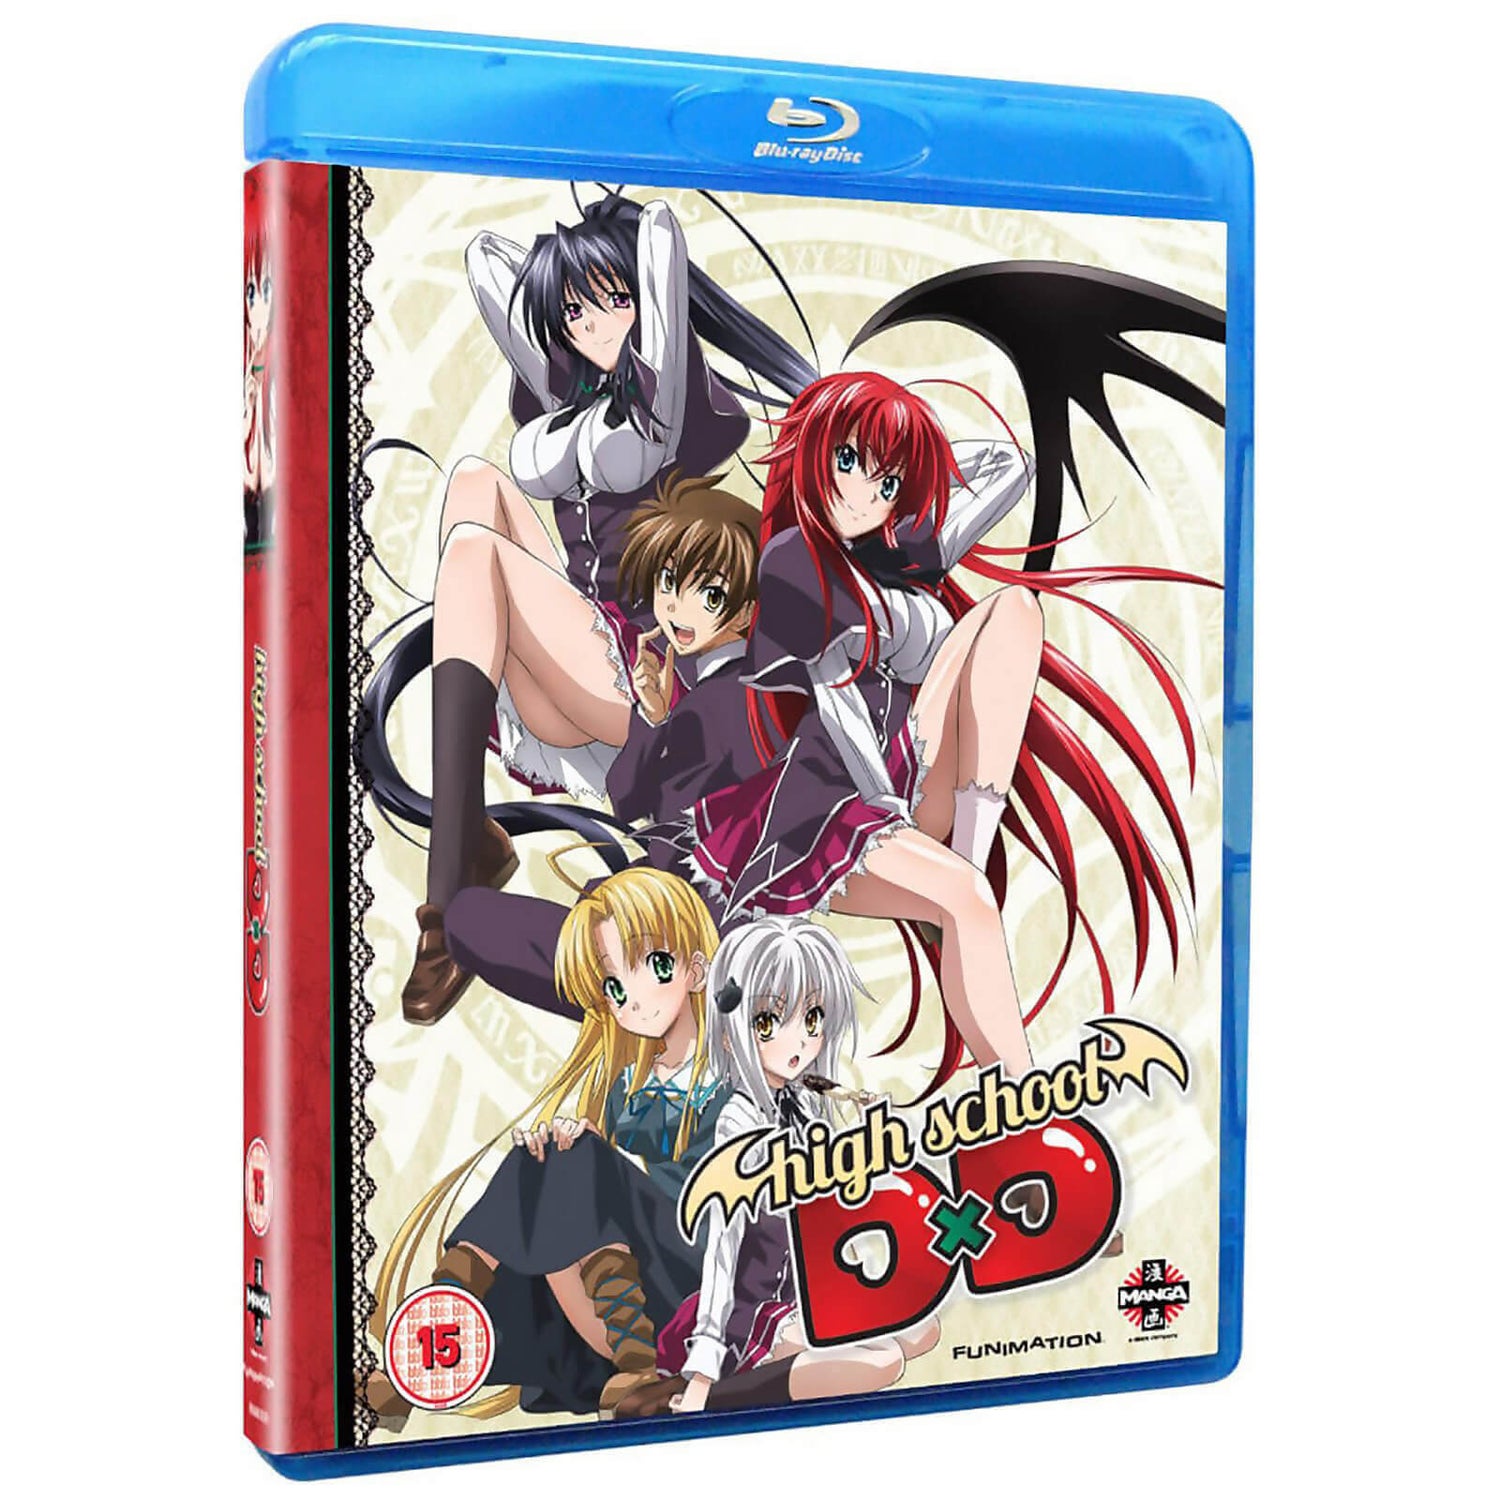 Read Adventures In Dxd With Gamer Ability And Shop System (On